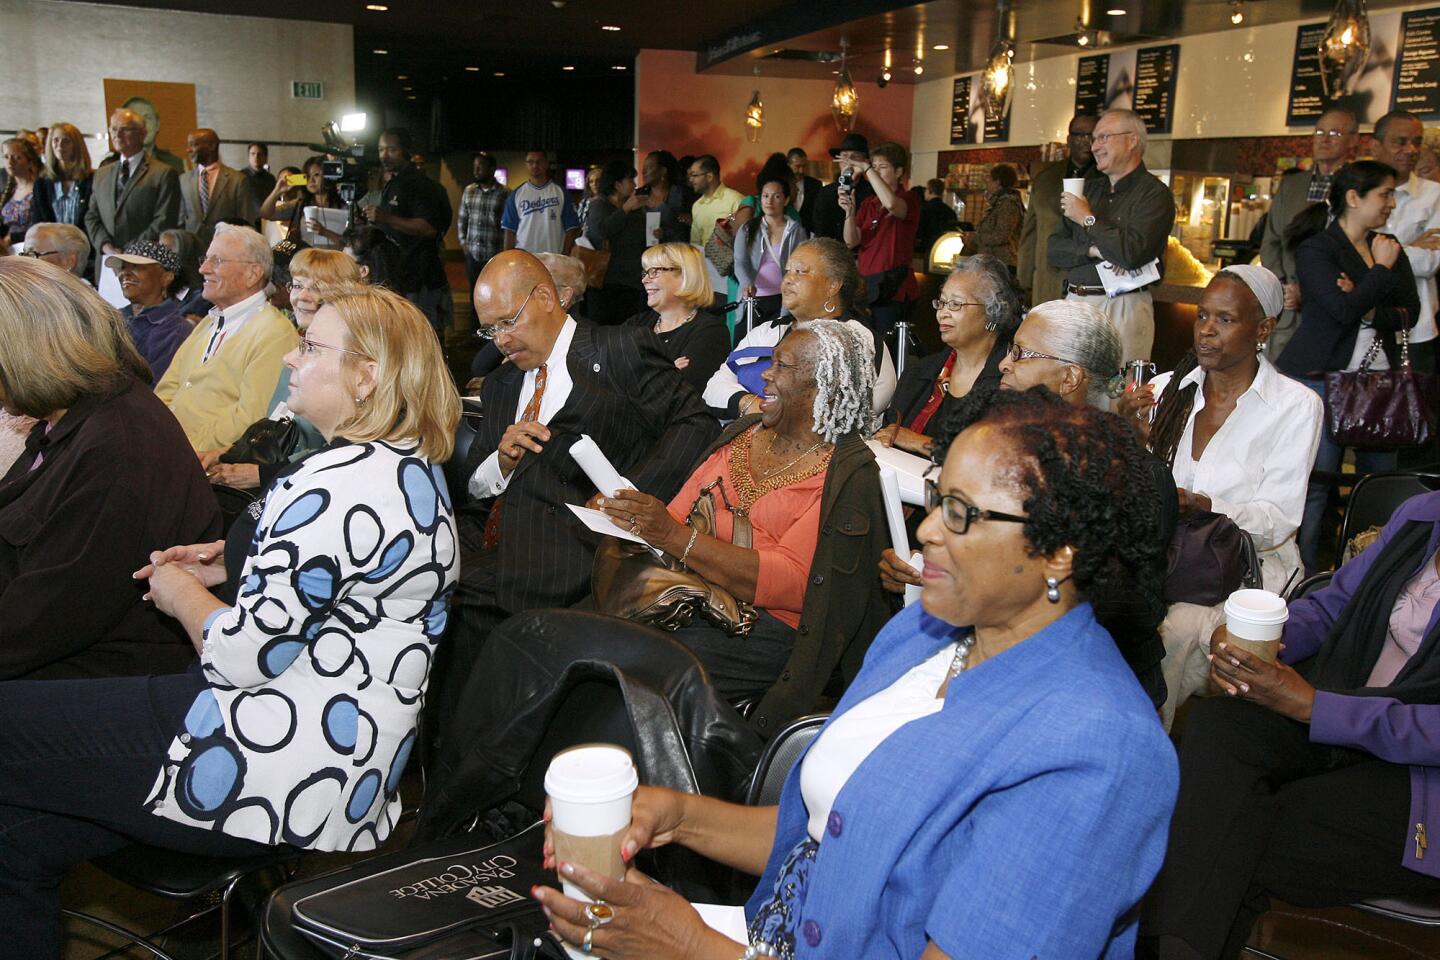 Photo Gallery: Private reception for baseball great Jackie Robinson movie "42"